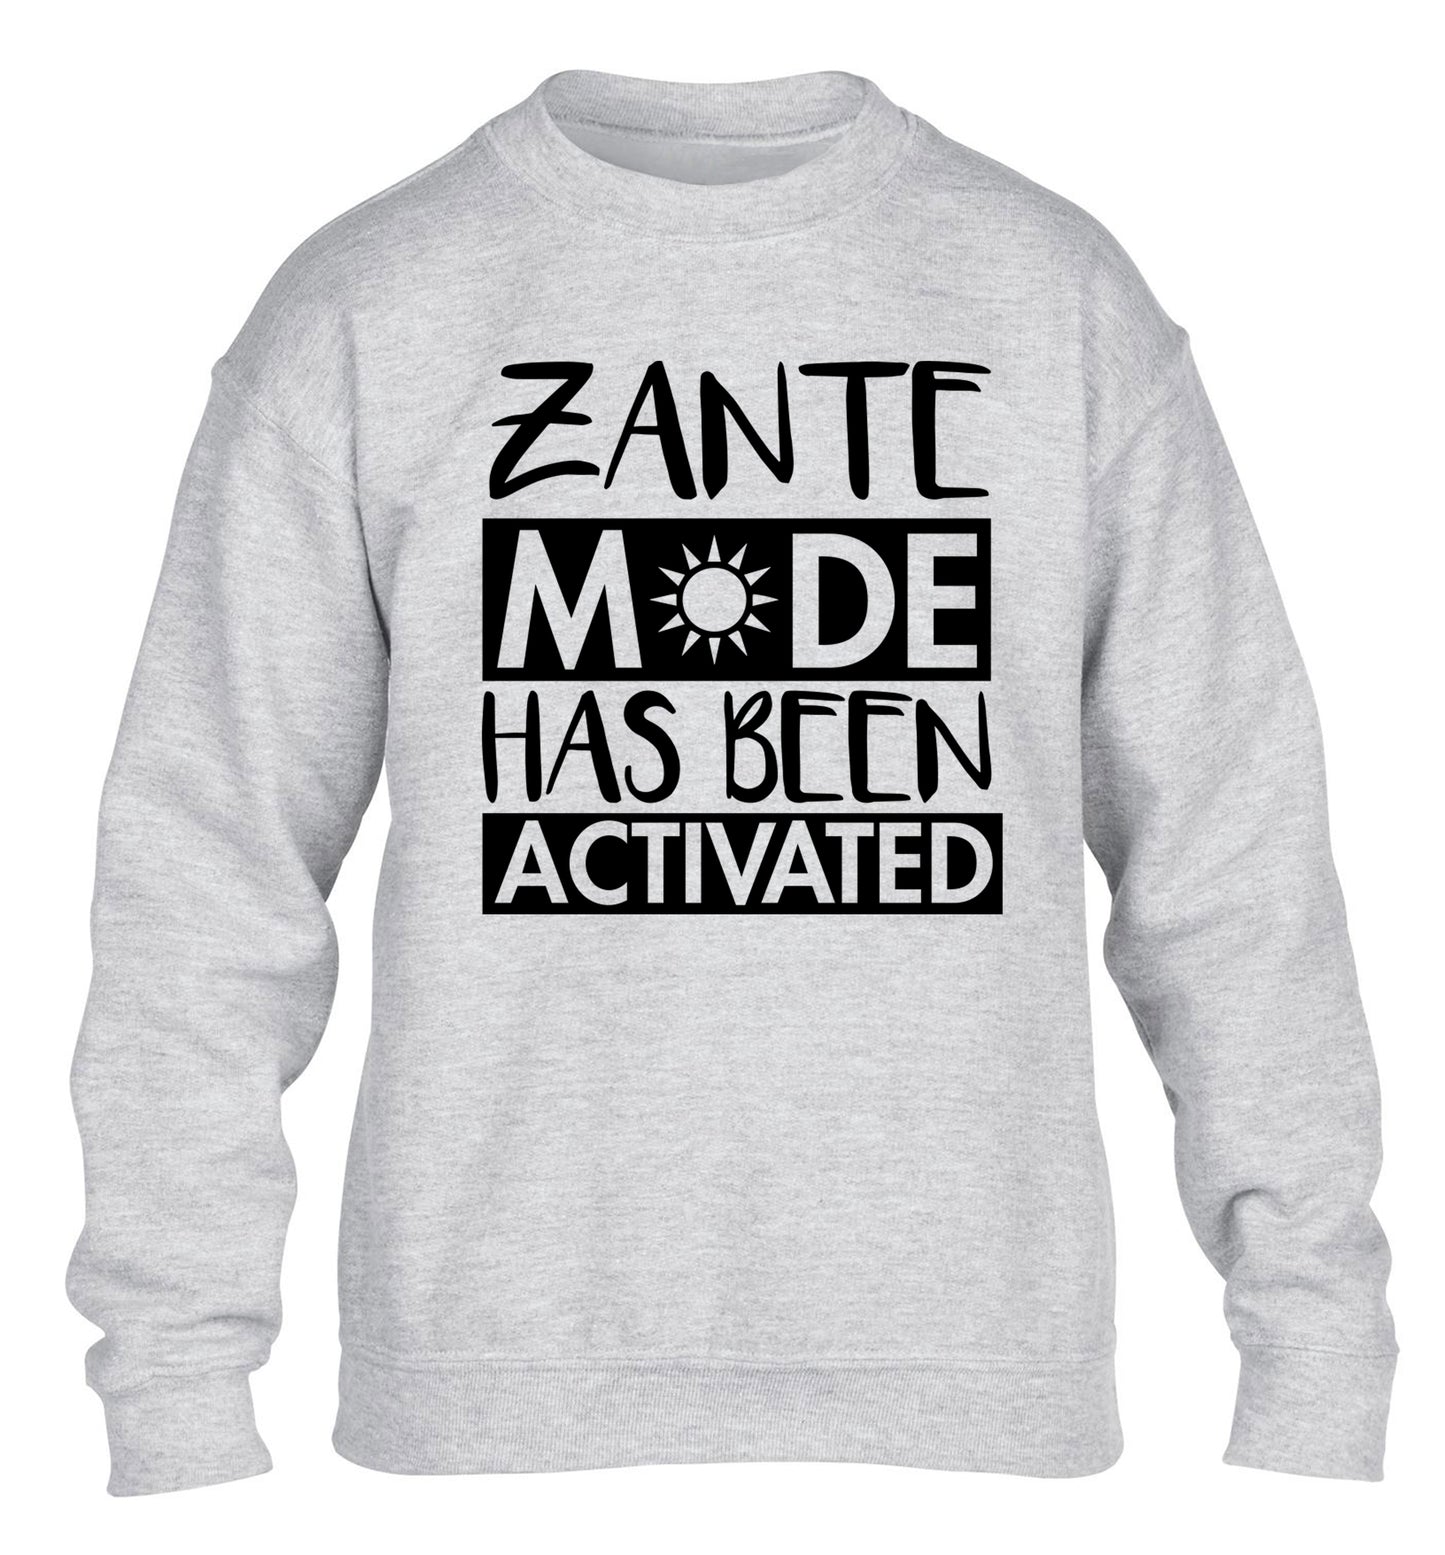 Zante mode has been activated children's grey sweater 12-13 Years